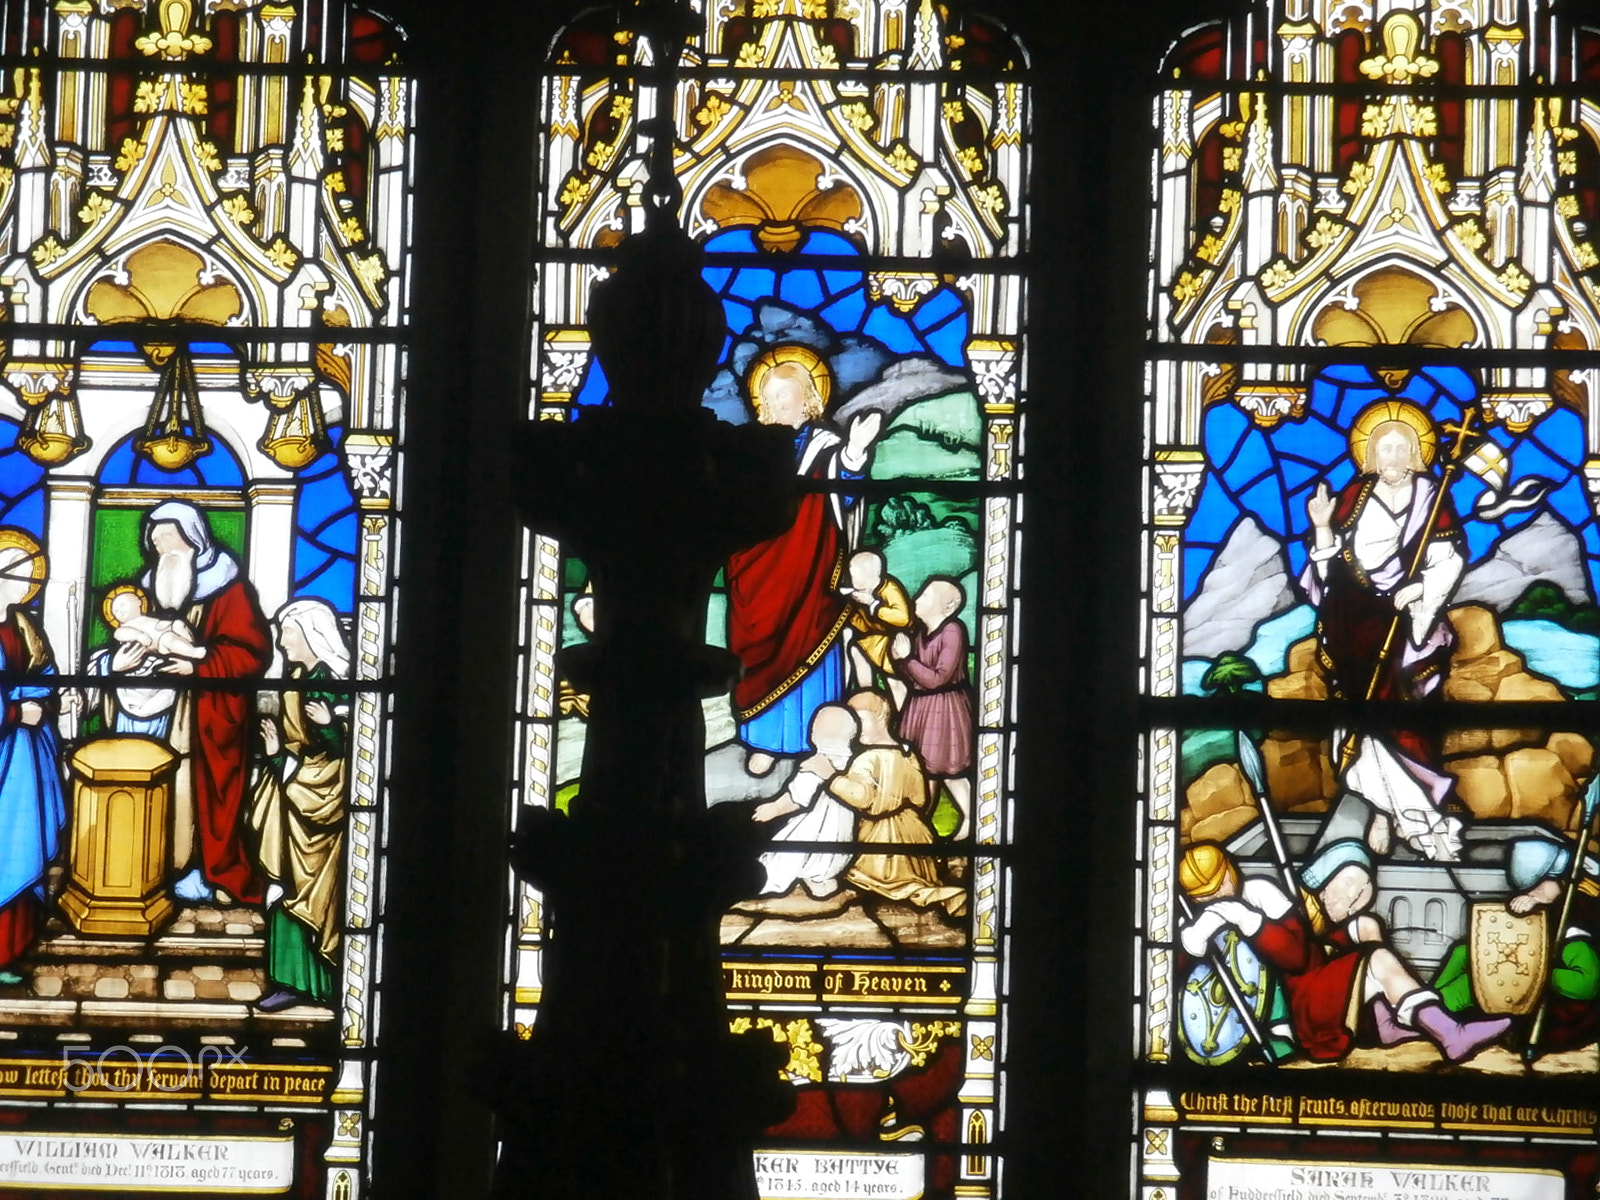 Olympus VG170 sample photo. Stain glass window from a church in huddersfield photography